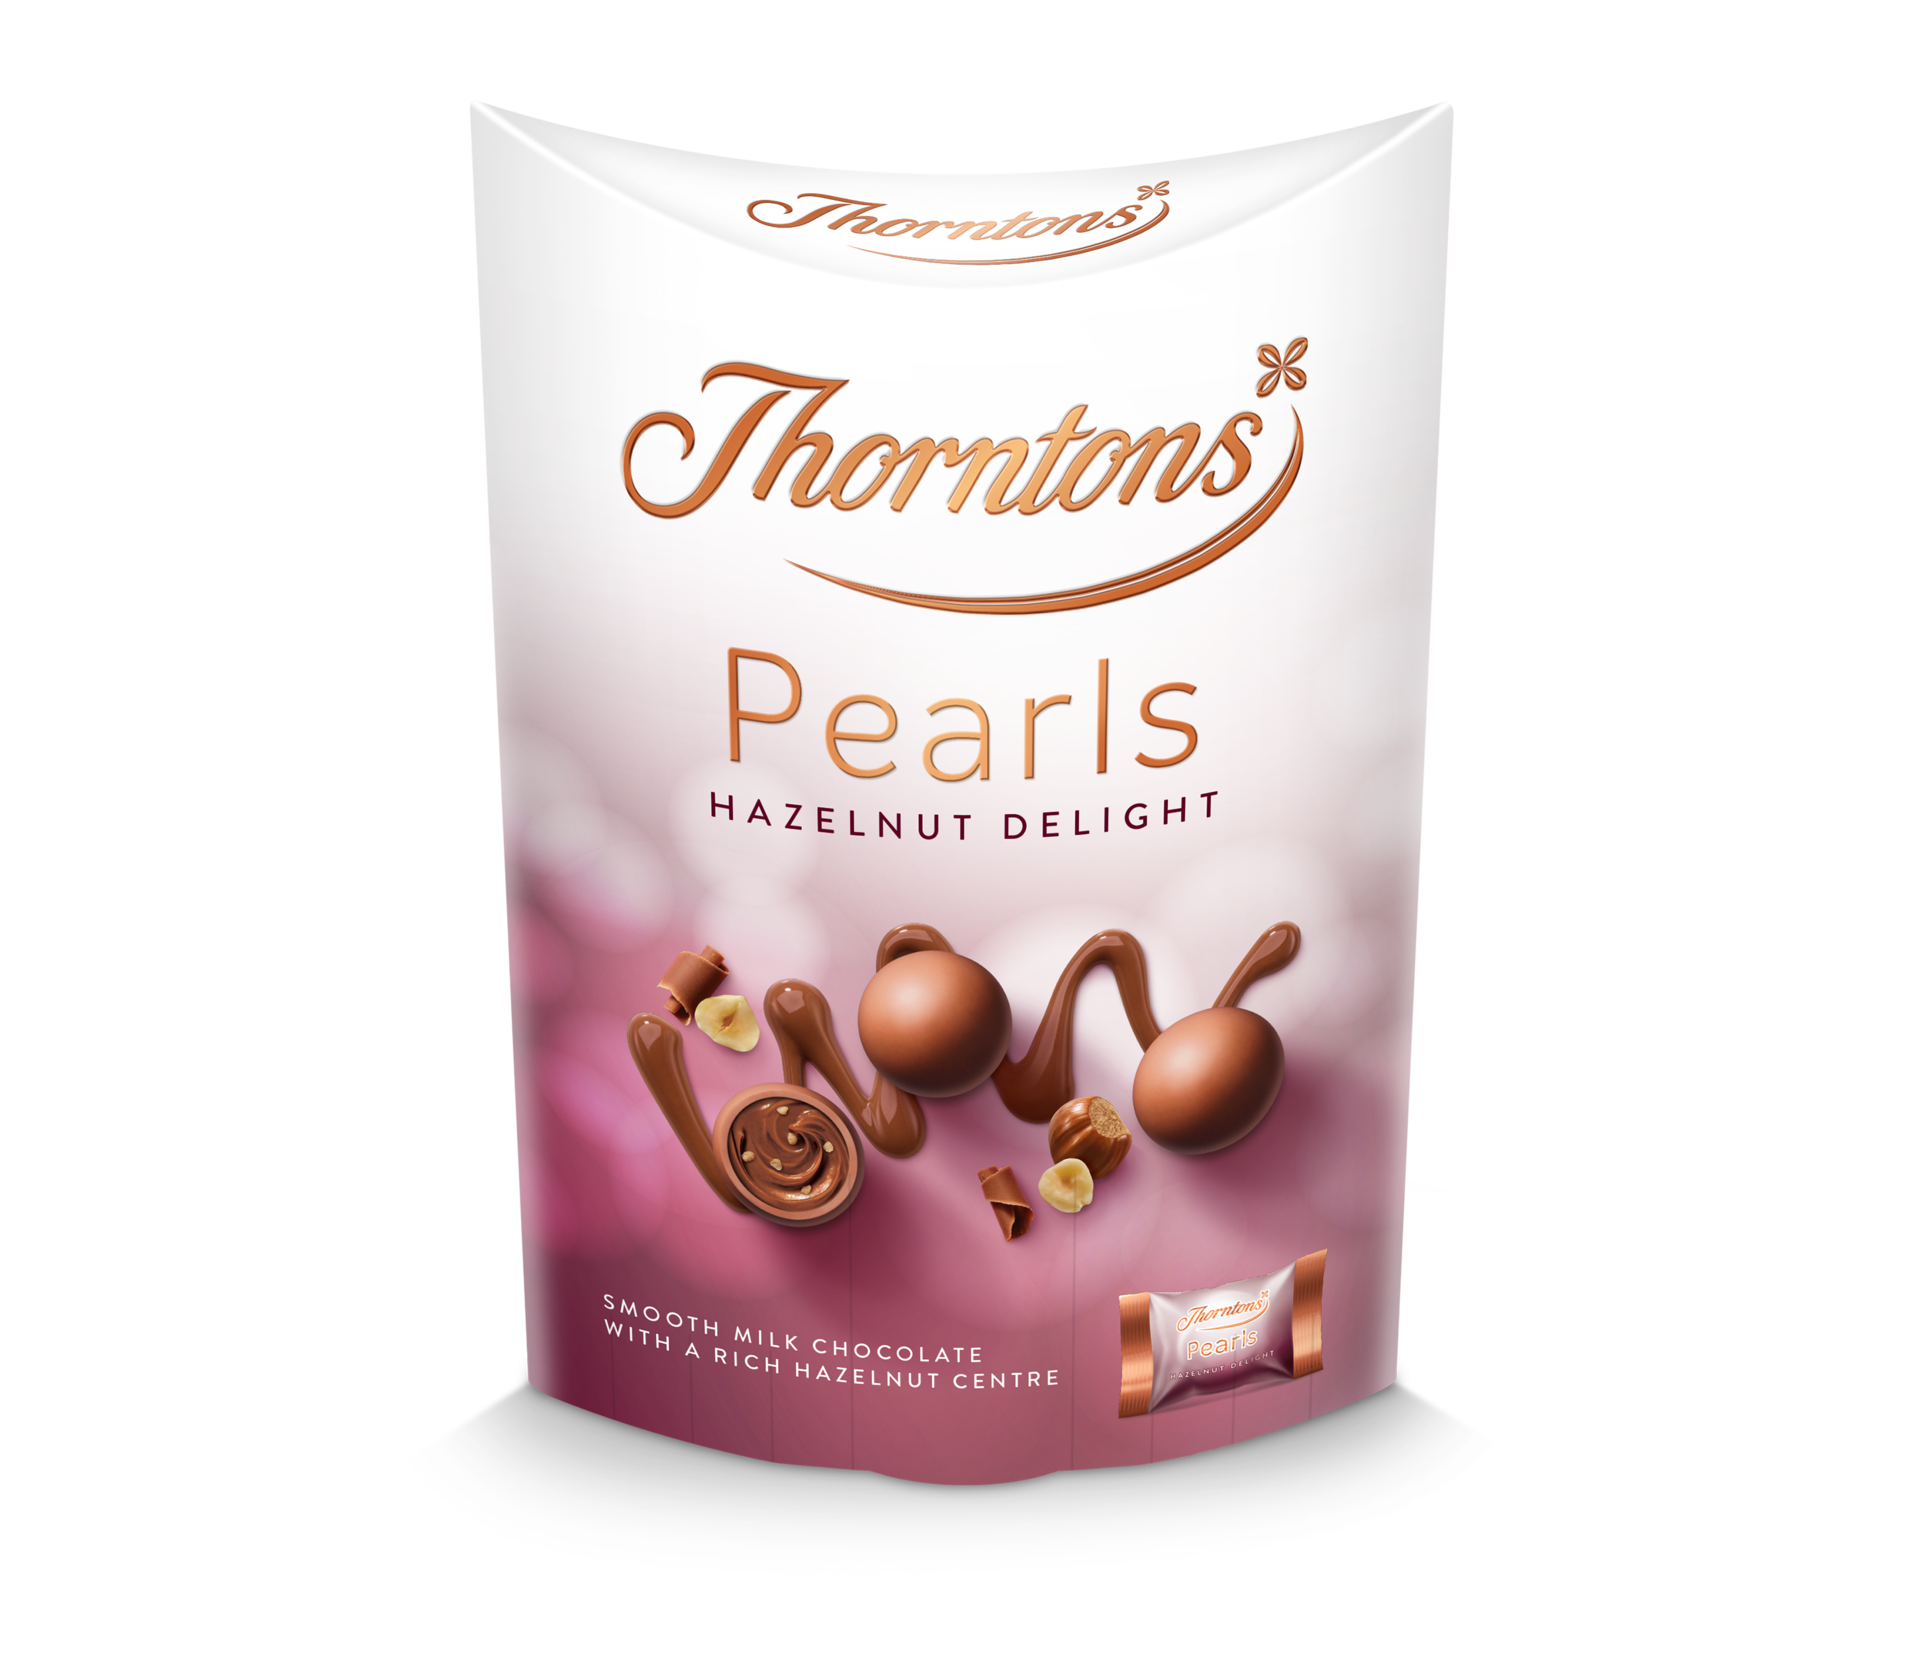 https://www.thorntons.com/medias/sys_master/images/h59/h06/8903681966110/77226874_main/77226874-main.png?resize=ProductGridComponent